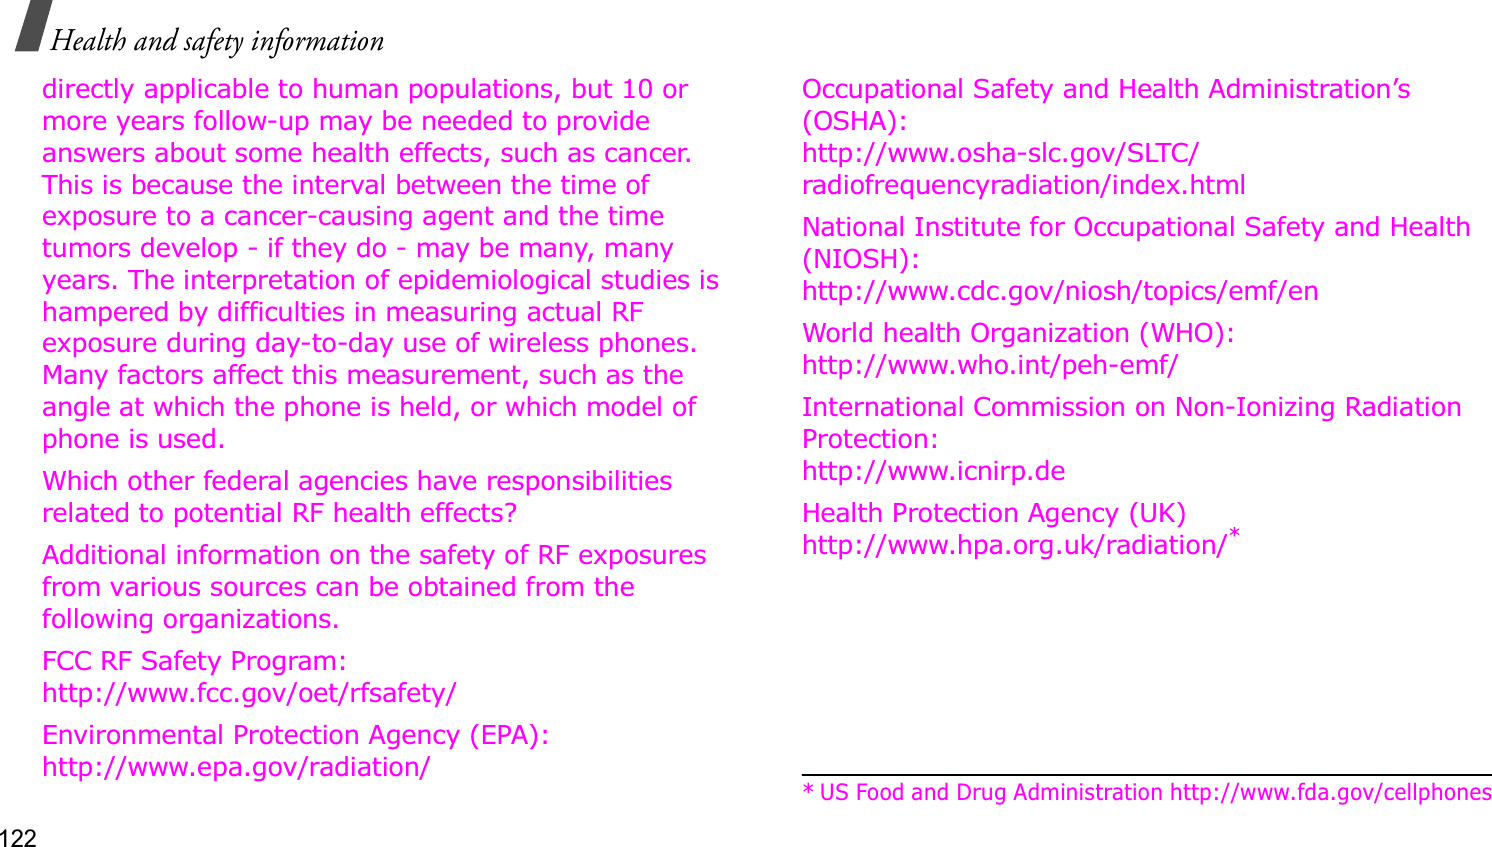 122Health and safety informationdirectly applicable to human populations, but 10 or more years follow-up may be needed to provide answers about some health effects, such as cancer. This is because the interval between the time of exposure to a cancer-causing agent and the time tumors develop - if they do - may be many, many years. The interpretation of epidemiological studies is hampered by difficulties in measuring actual RF exposure during day-to-day use of wireless phones. Many factors affect this measurement, such as the angle at which the phone is held, or which model of phone is used.Which other federal agencies have responsibilities related to potential RF health effects?Additional information on the safety of RF exposures from various sources can be obtained from the following organizations.FCC RF Safety Program:http://www.fcc.gov/oet/rfsafety/Environmental Protection Agency (EPA):http://www.epa.gov/radiation/Occupational Safety and Health Administration’s (OSHA):http://www.osha-slc.gov/SLTC/radiofrequencyradiation/index.htmlNational Institute for Occupational Safety and Health (NIOSH):http://www.cdc.gov/niosh/topics/emf/enWorld health Organization (WHO):http://www.who.int/peh-emf/International Commission on Non-Ionizing Radiation Protection:http://www.icnirp.deHealth Protection Agency (UK) http://www.hpa.org.uk/radiation/** US Food and Drug Administration http://www.fda.gov/cellphones